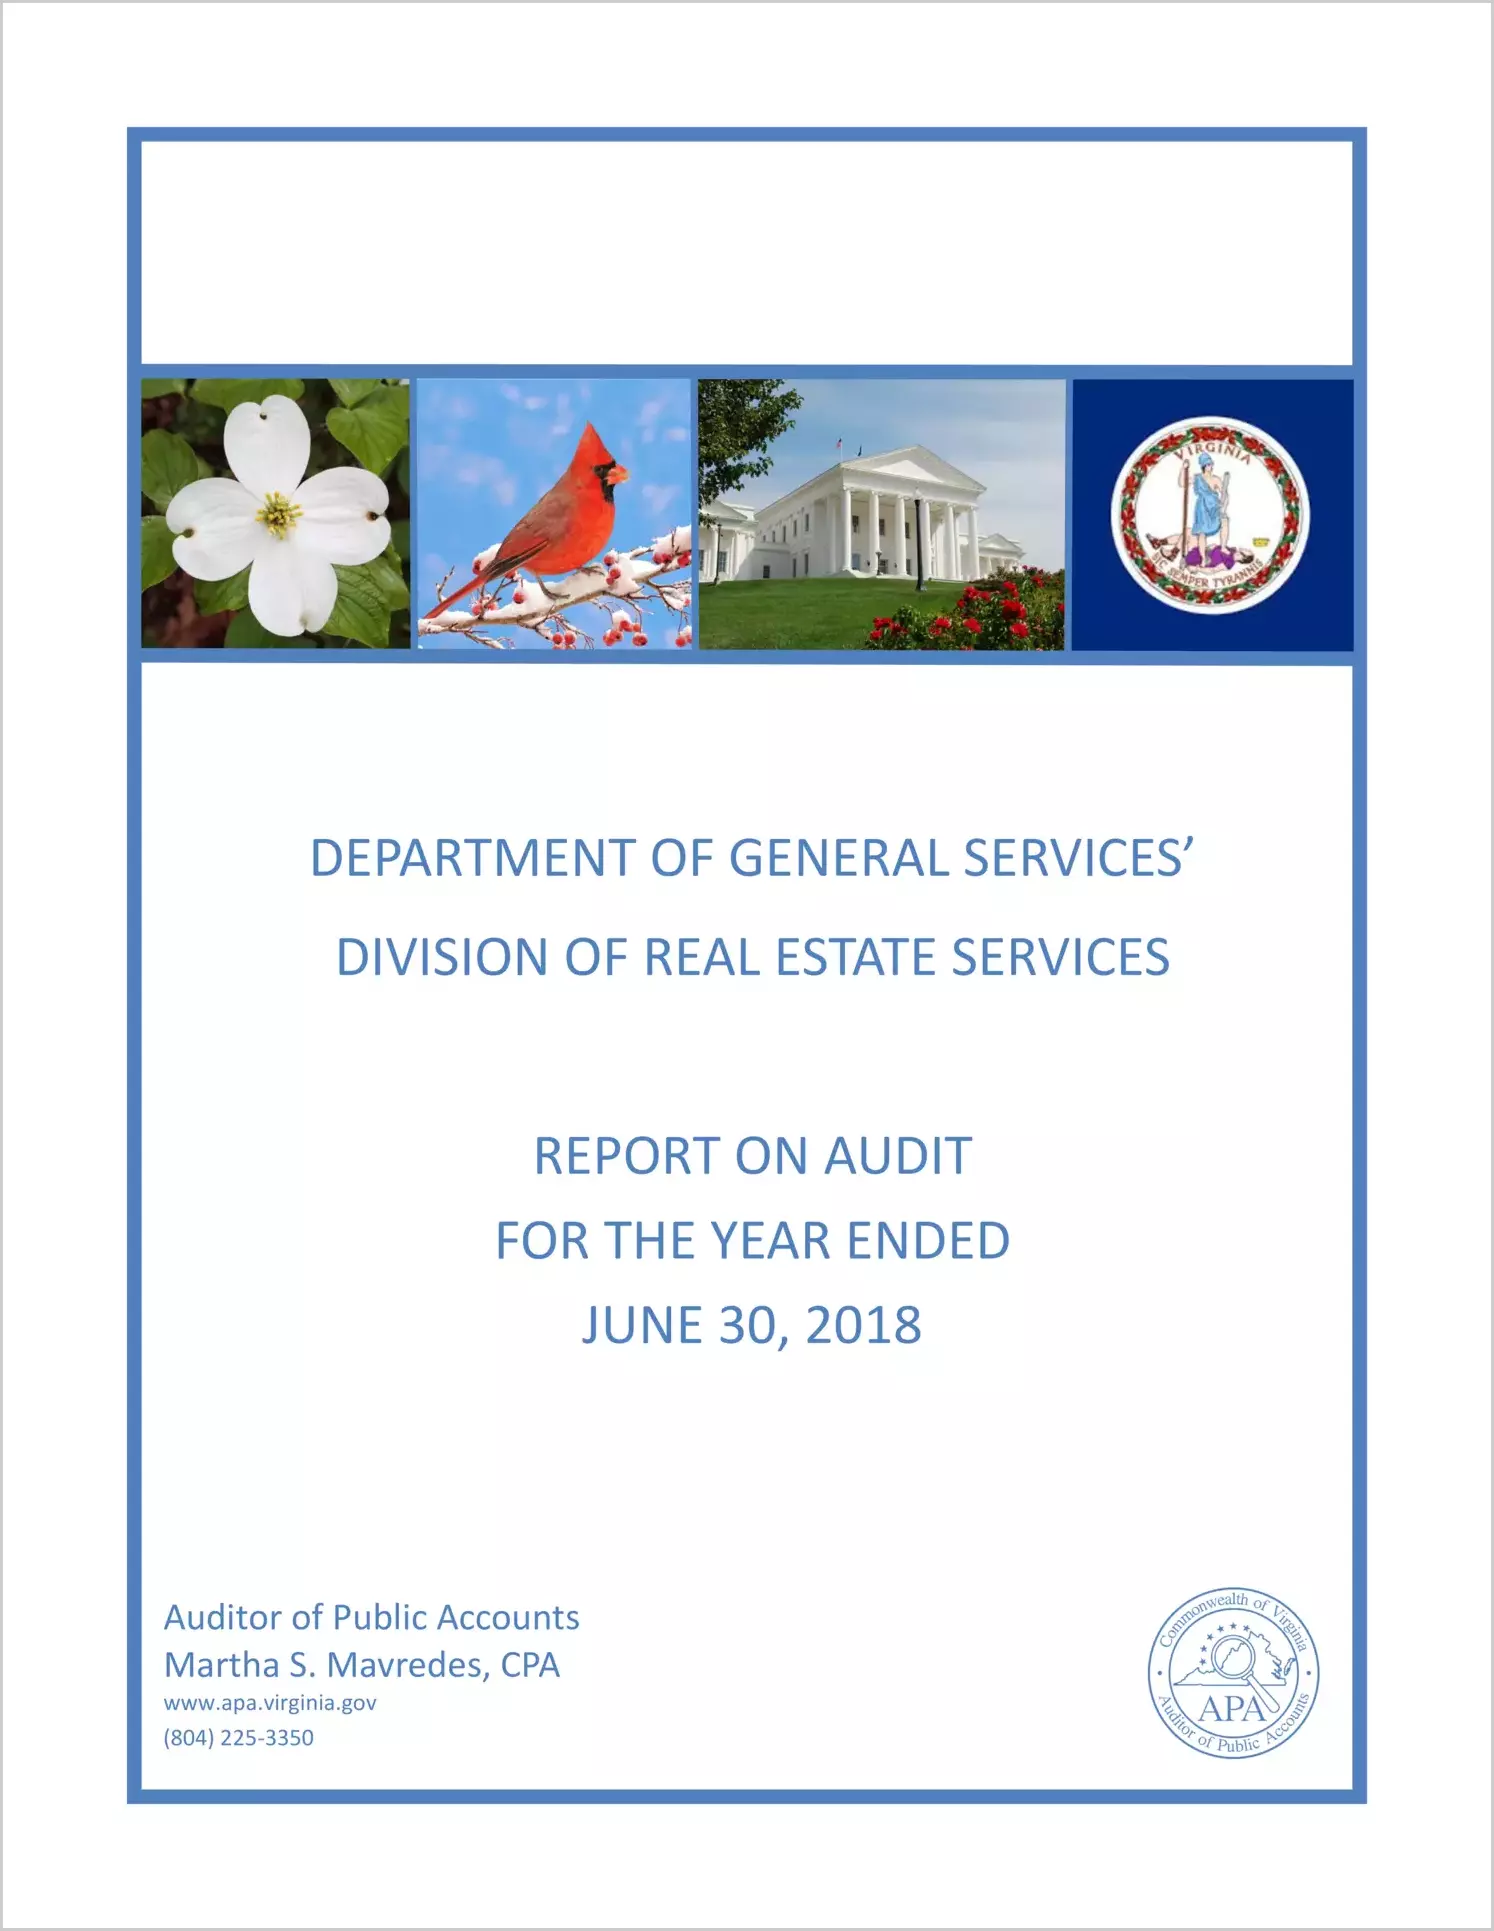 Department of General Service's Division of Real Estate Services for the year ended June 30, 2018